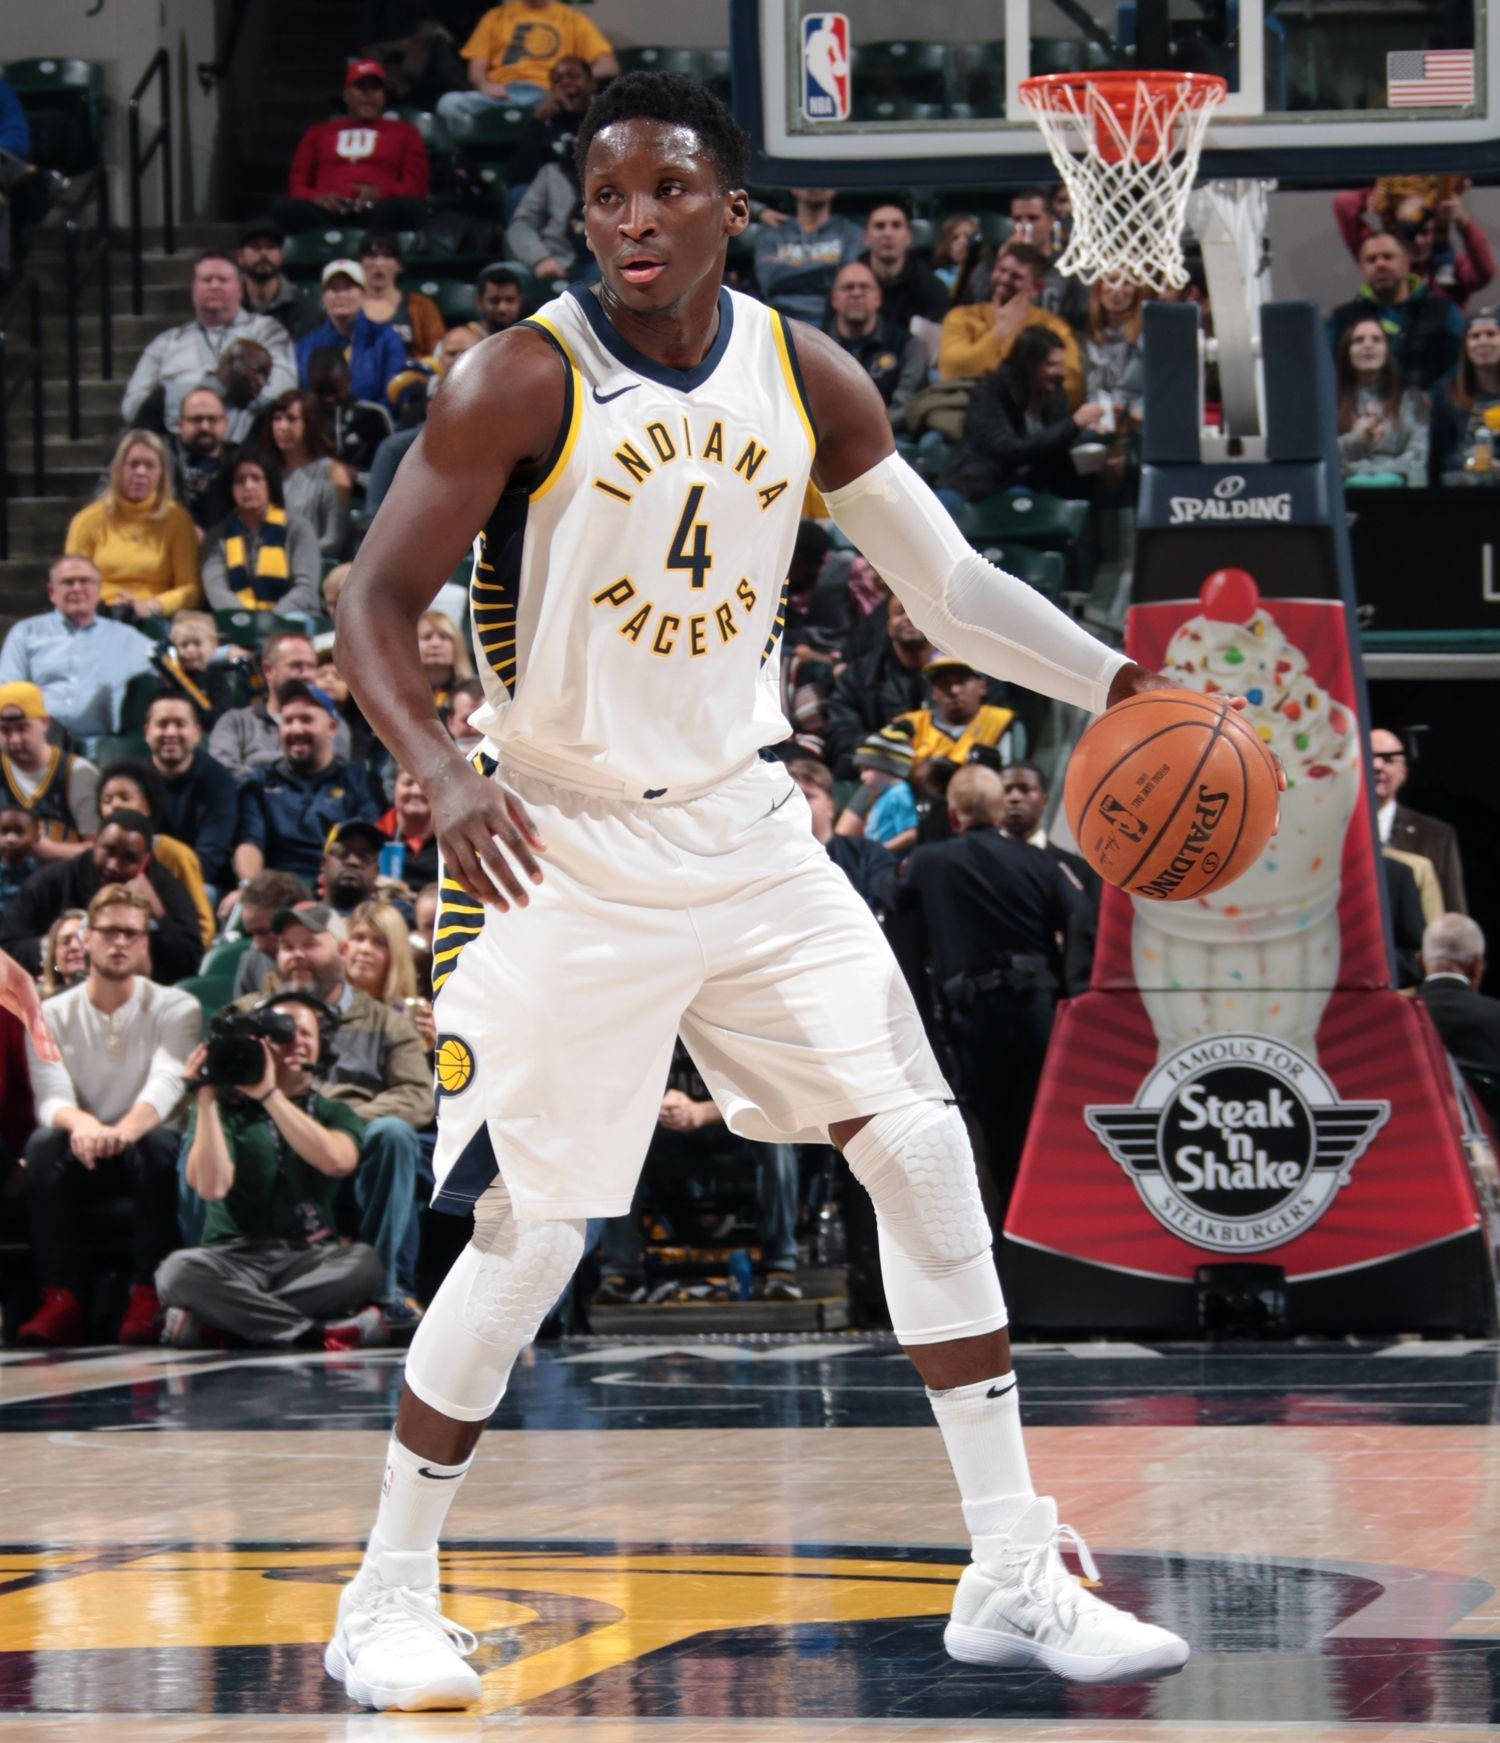 Victor Oladipo In All-White Outfit Wallpaper